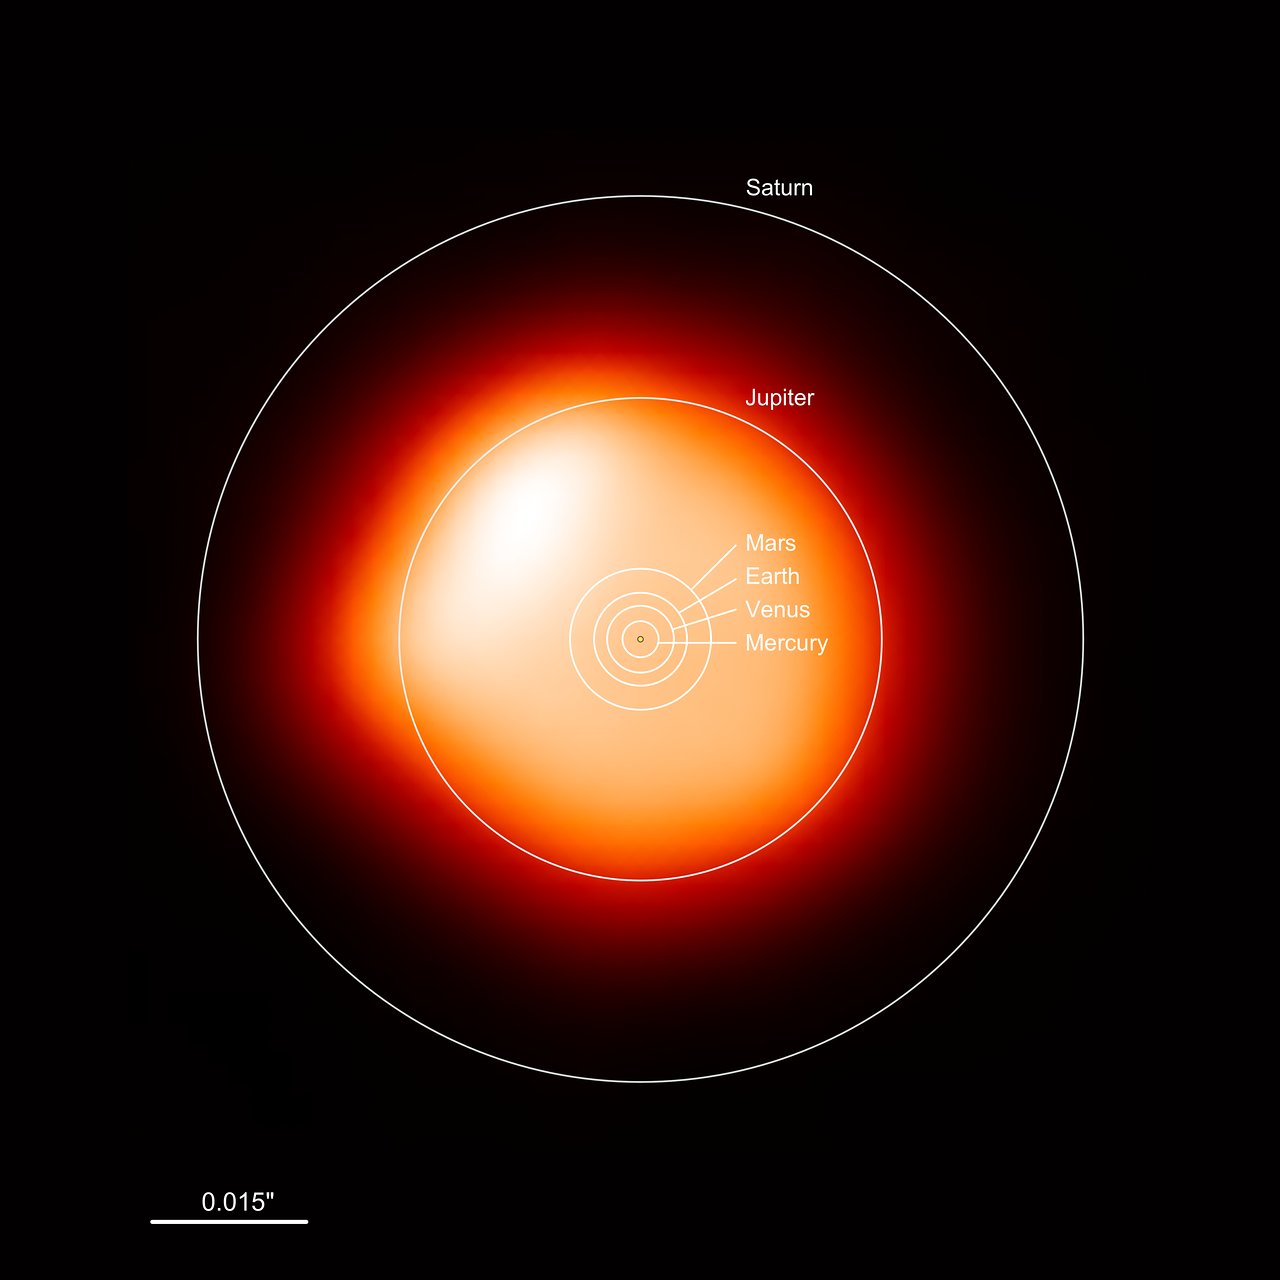 ALMA image of Betelgeuse with solar system overlay